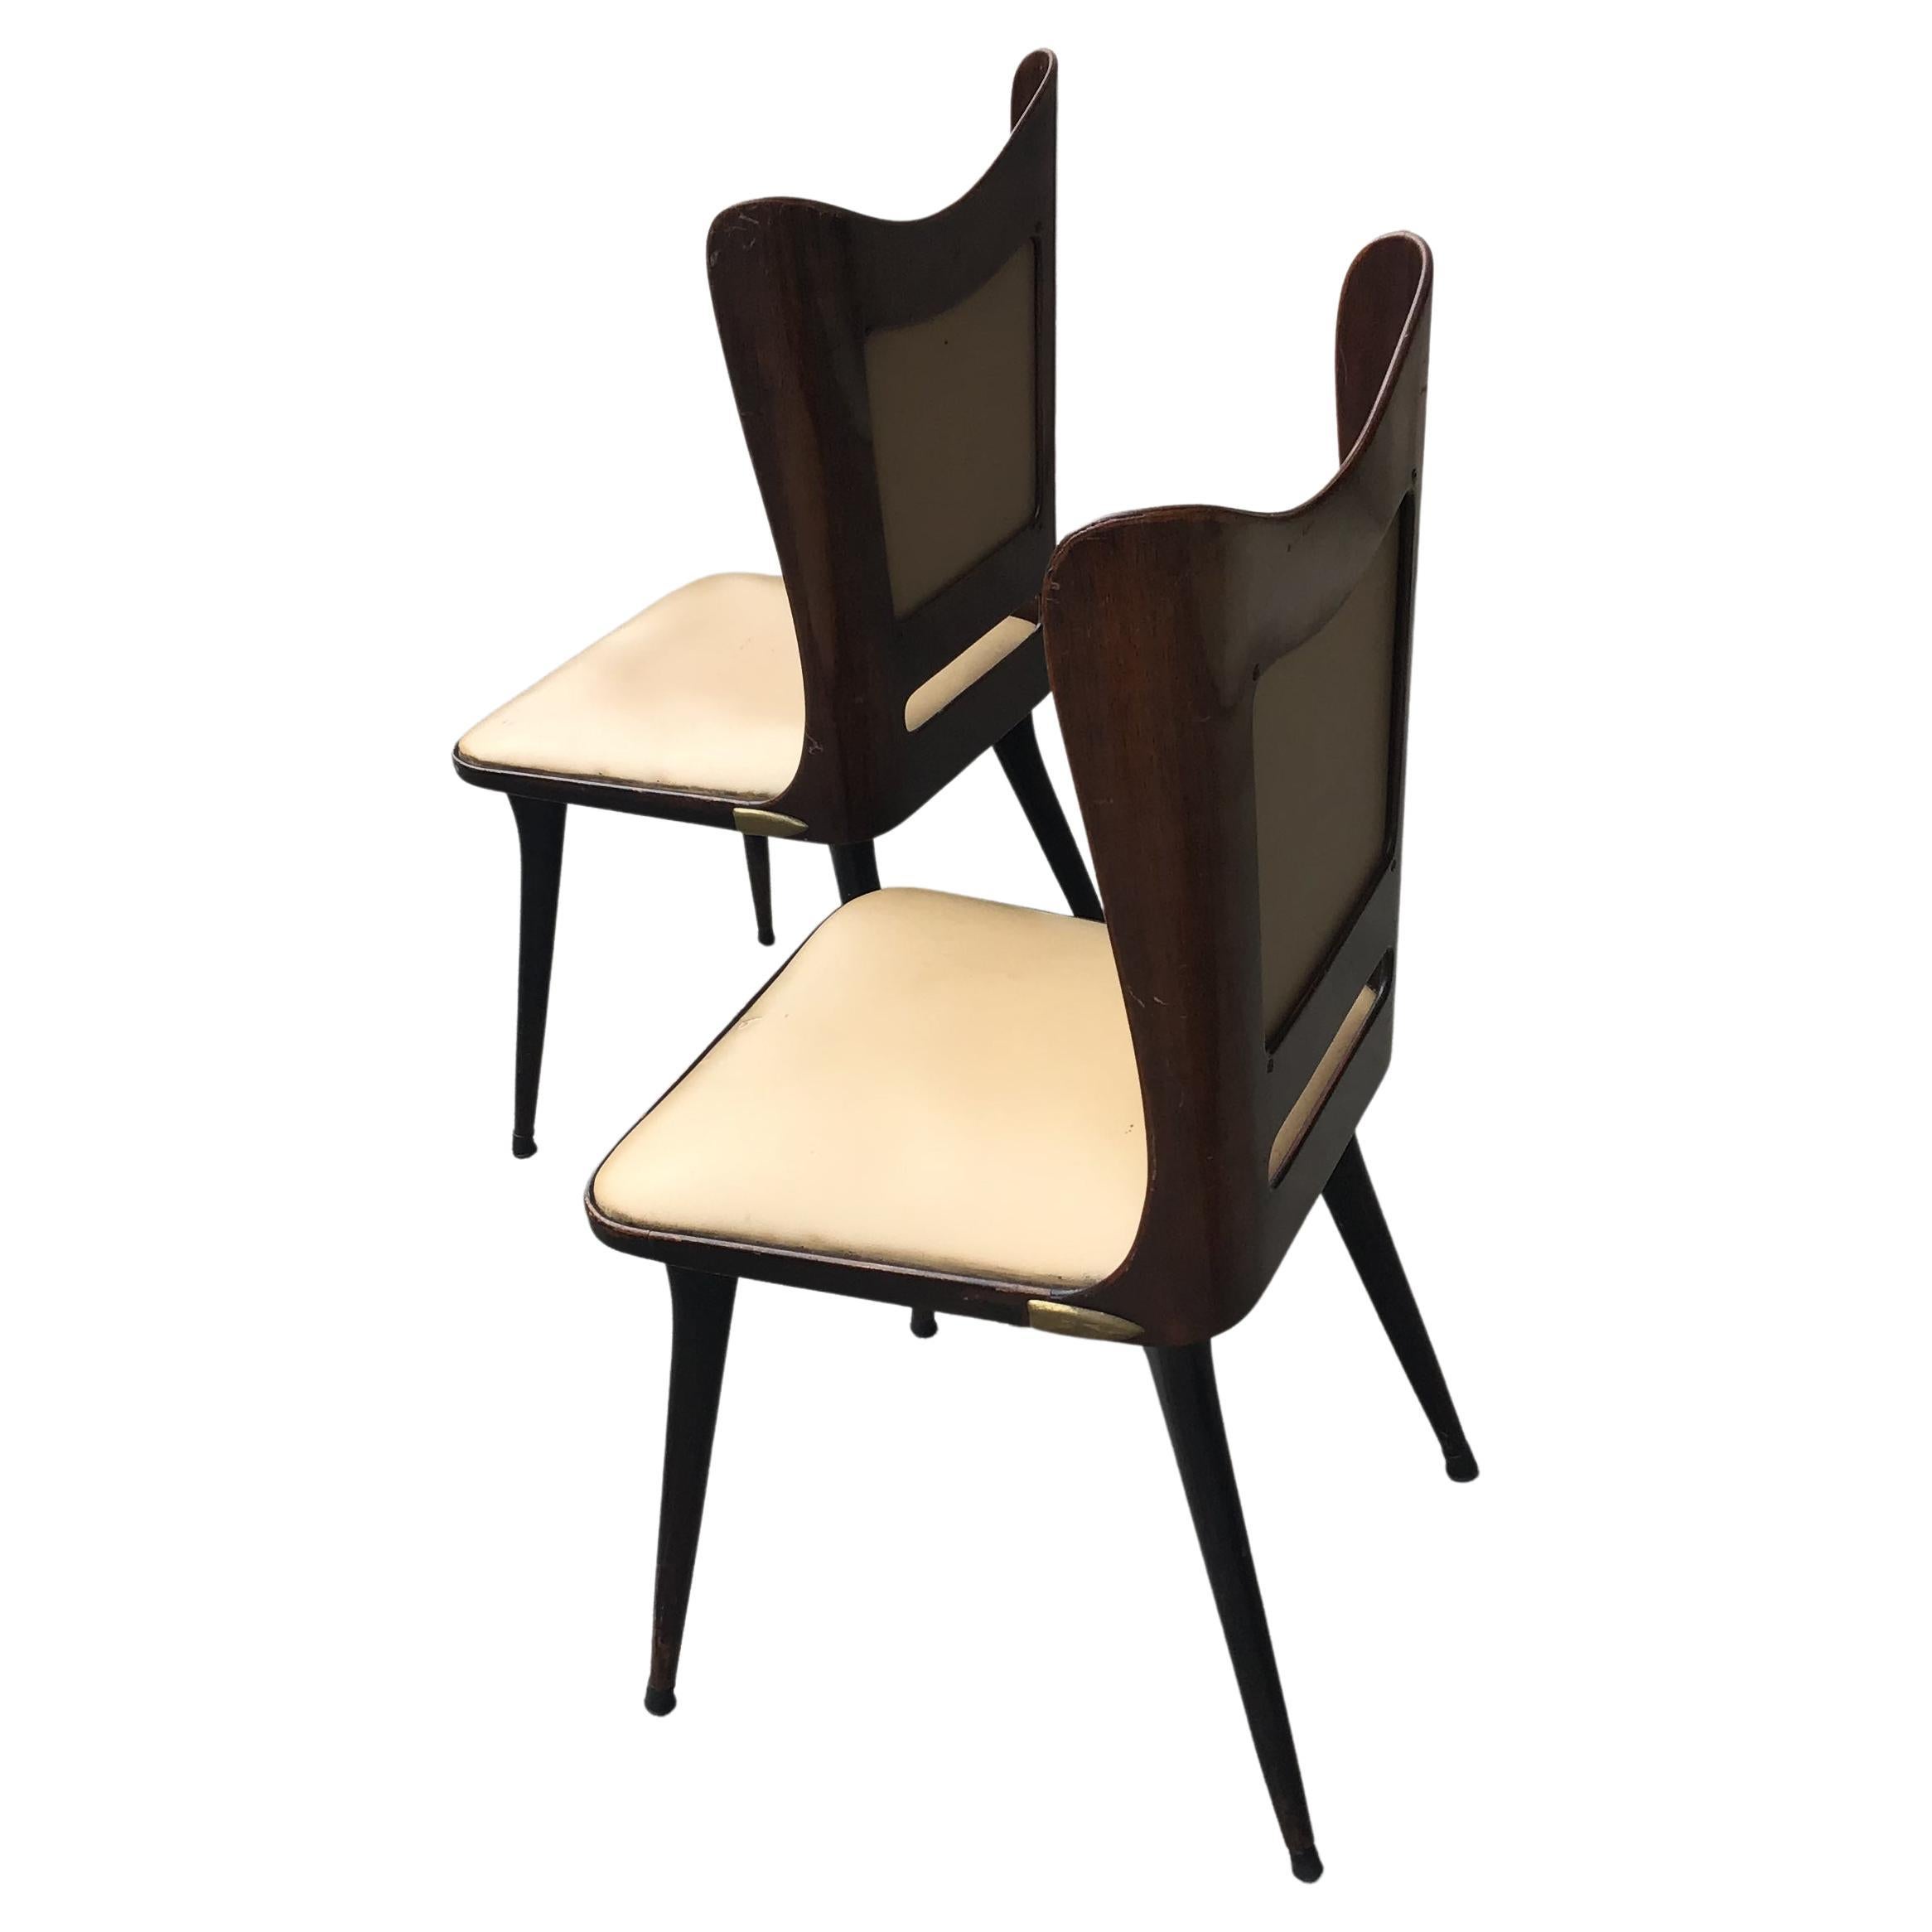 Carlo Ratti Chairs Wood Brass Skin 1955, Italy For Sale